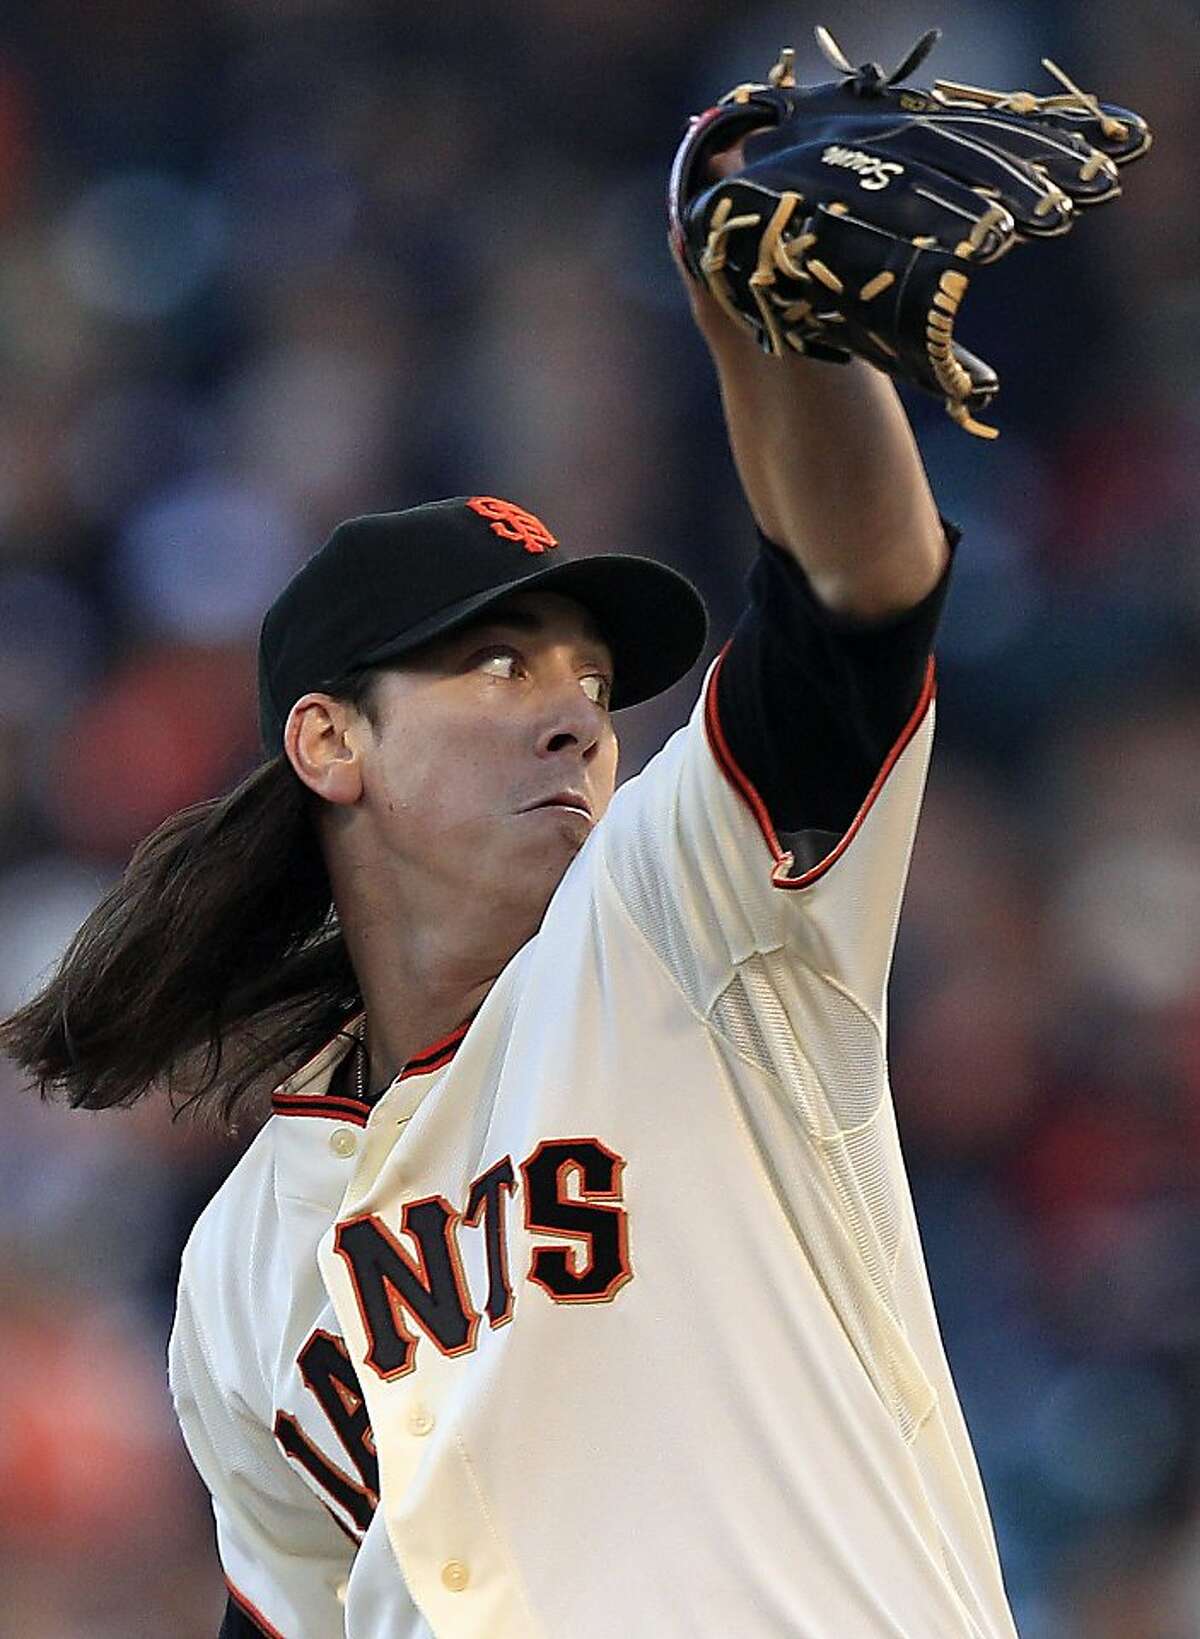 San Francisco Giants starting pitcher Tim Lincecum throws to the Chicago Cubs during the first inning of a baseball game in San Francisco, Monday, Aug. 29, 2011. (AP Photo/Marcio Jose Sanchez)